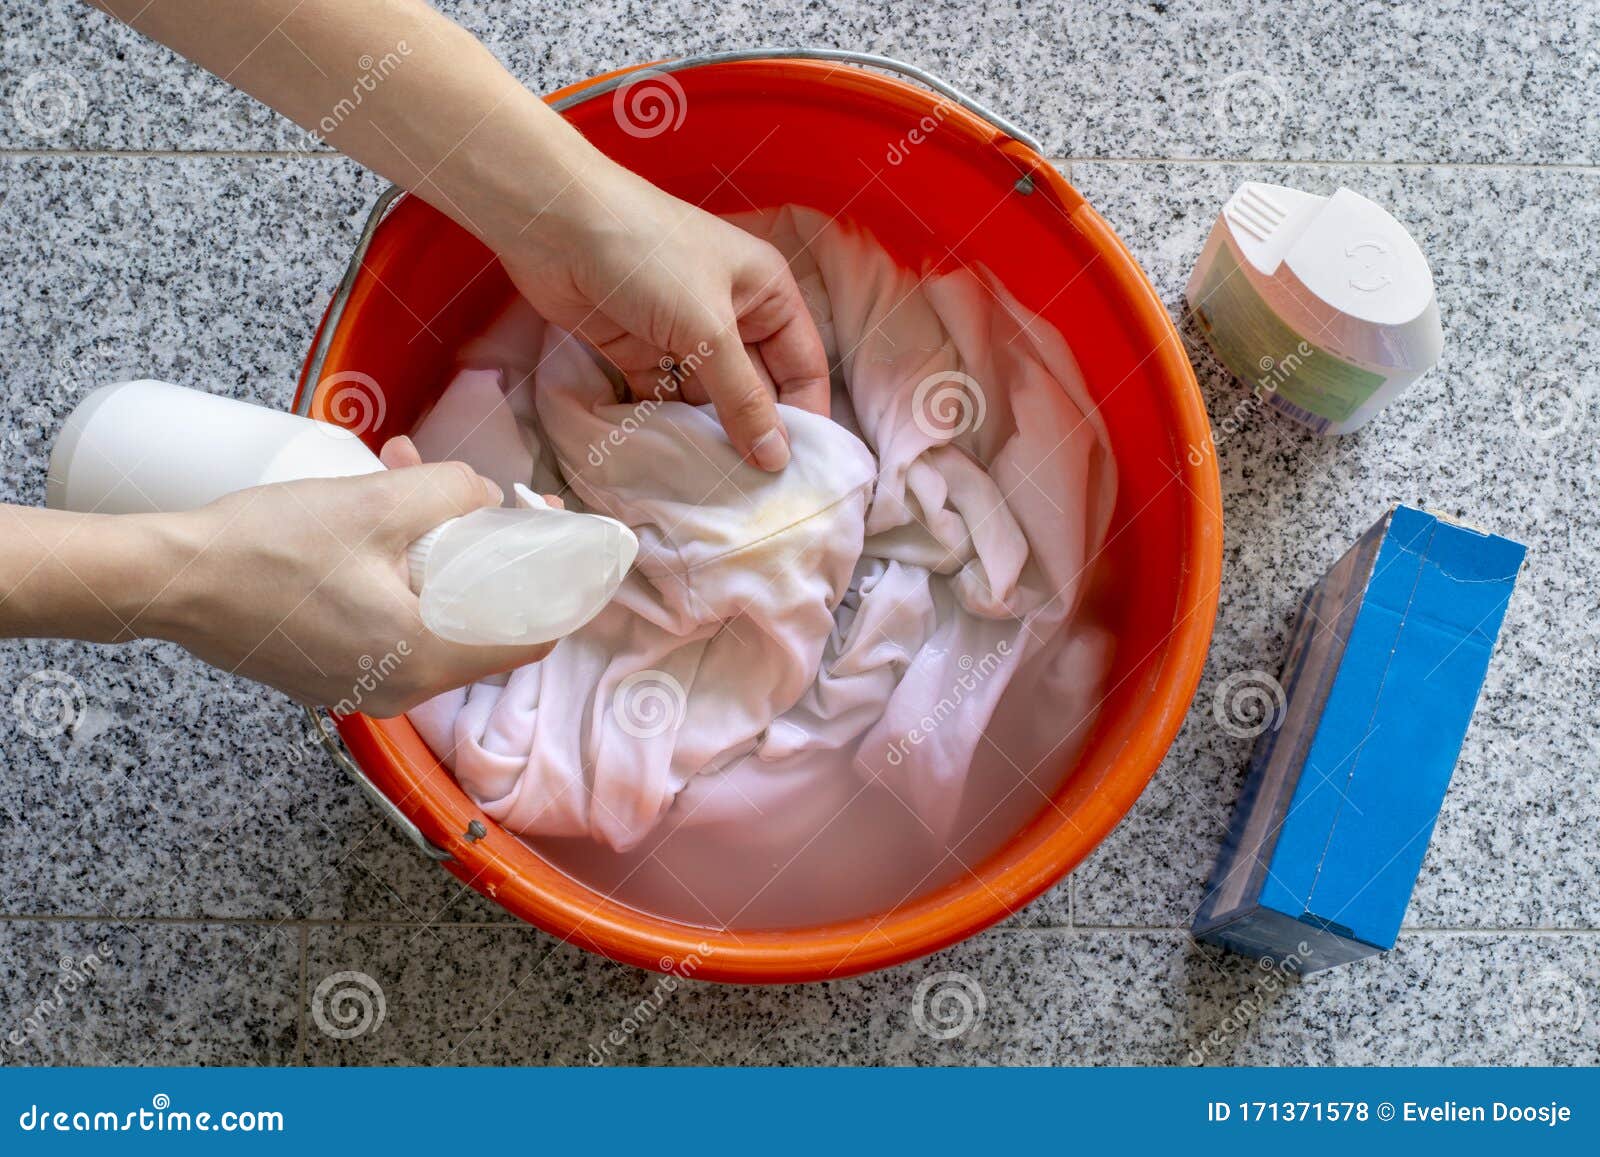 womens hands washing dirty stained white shirts with a stain remover from a spray detergent bottle for yellow sweat stains in a